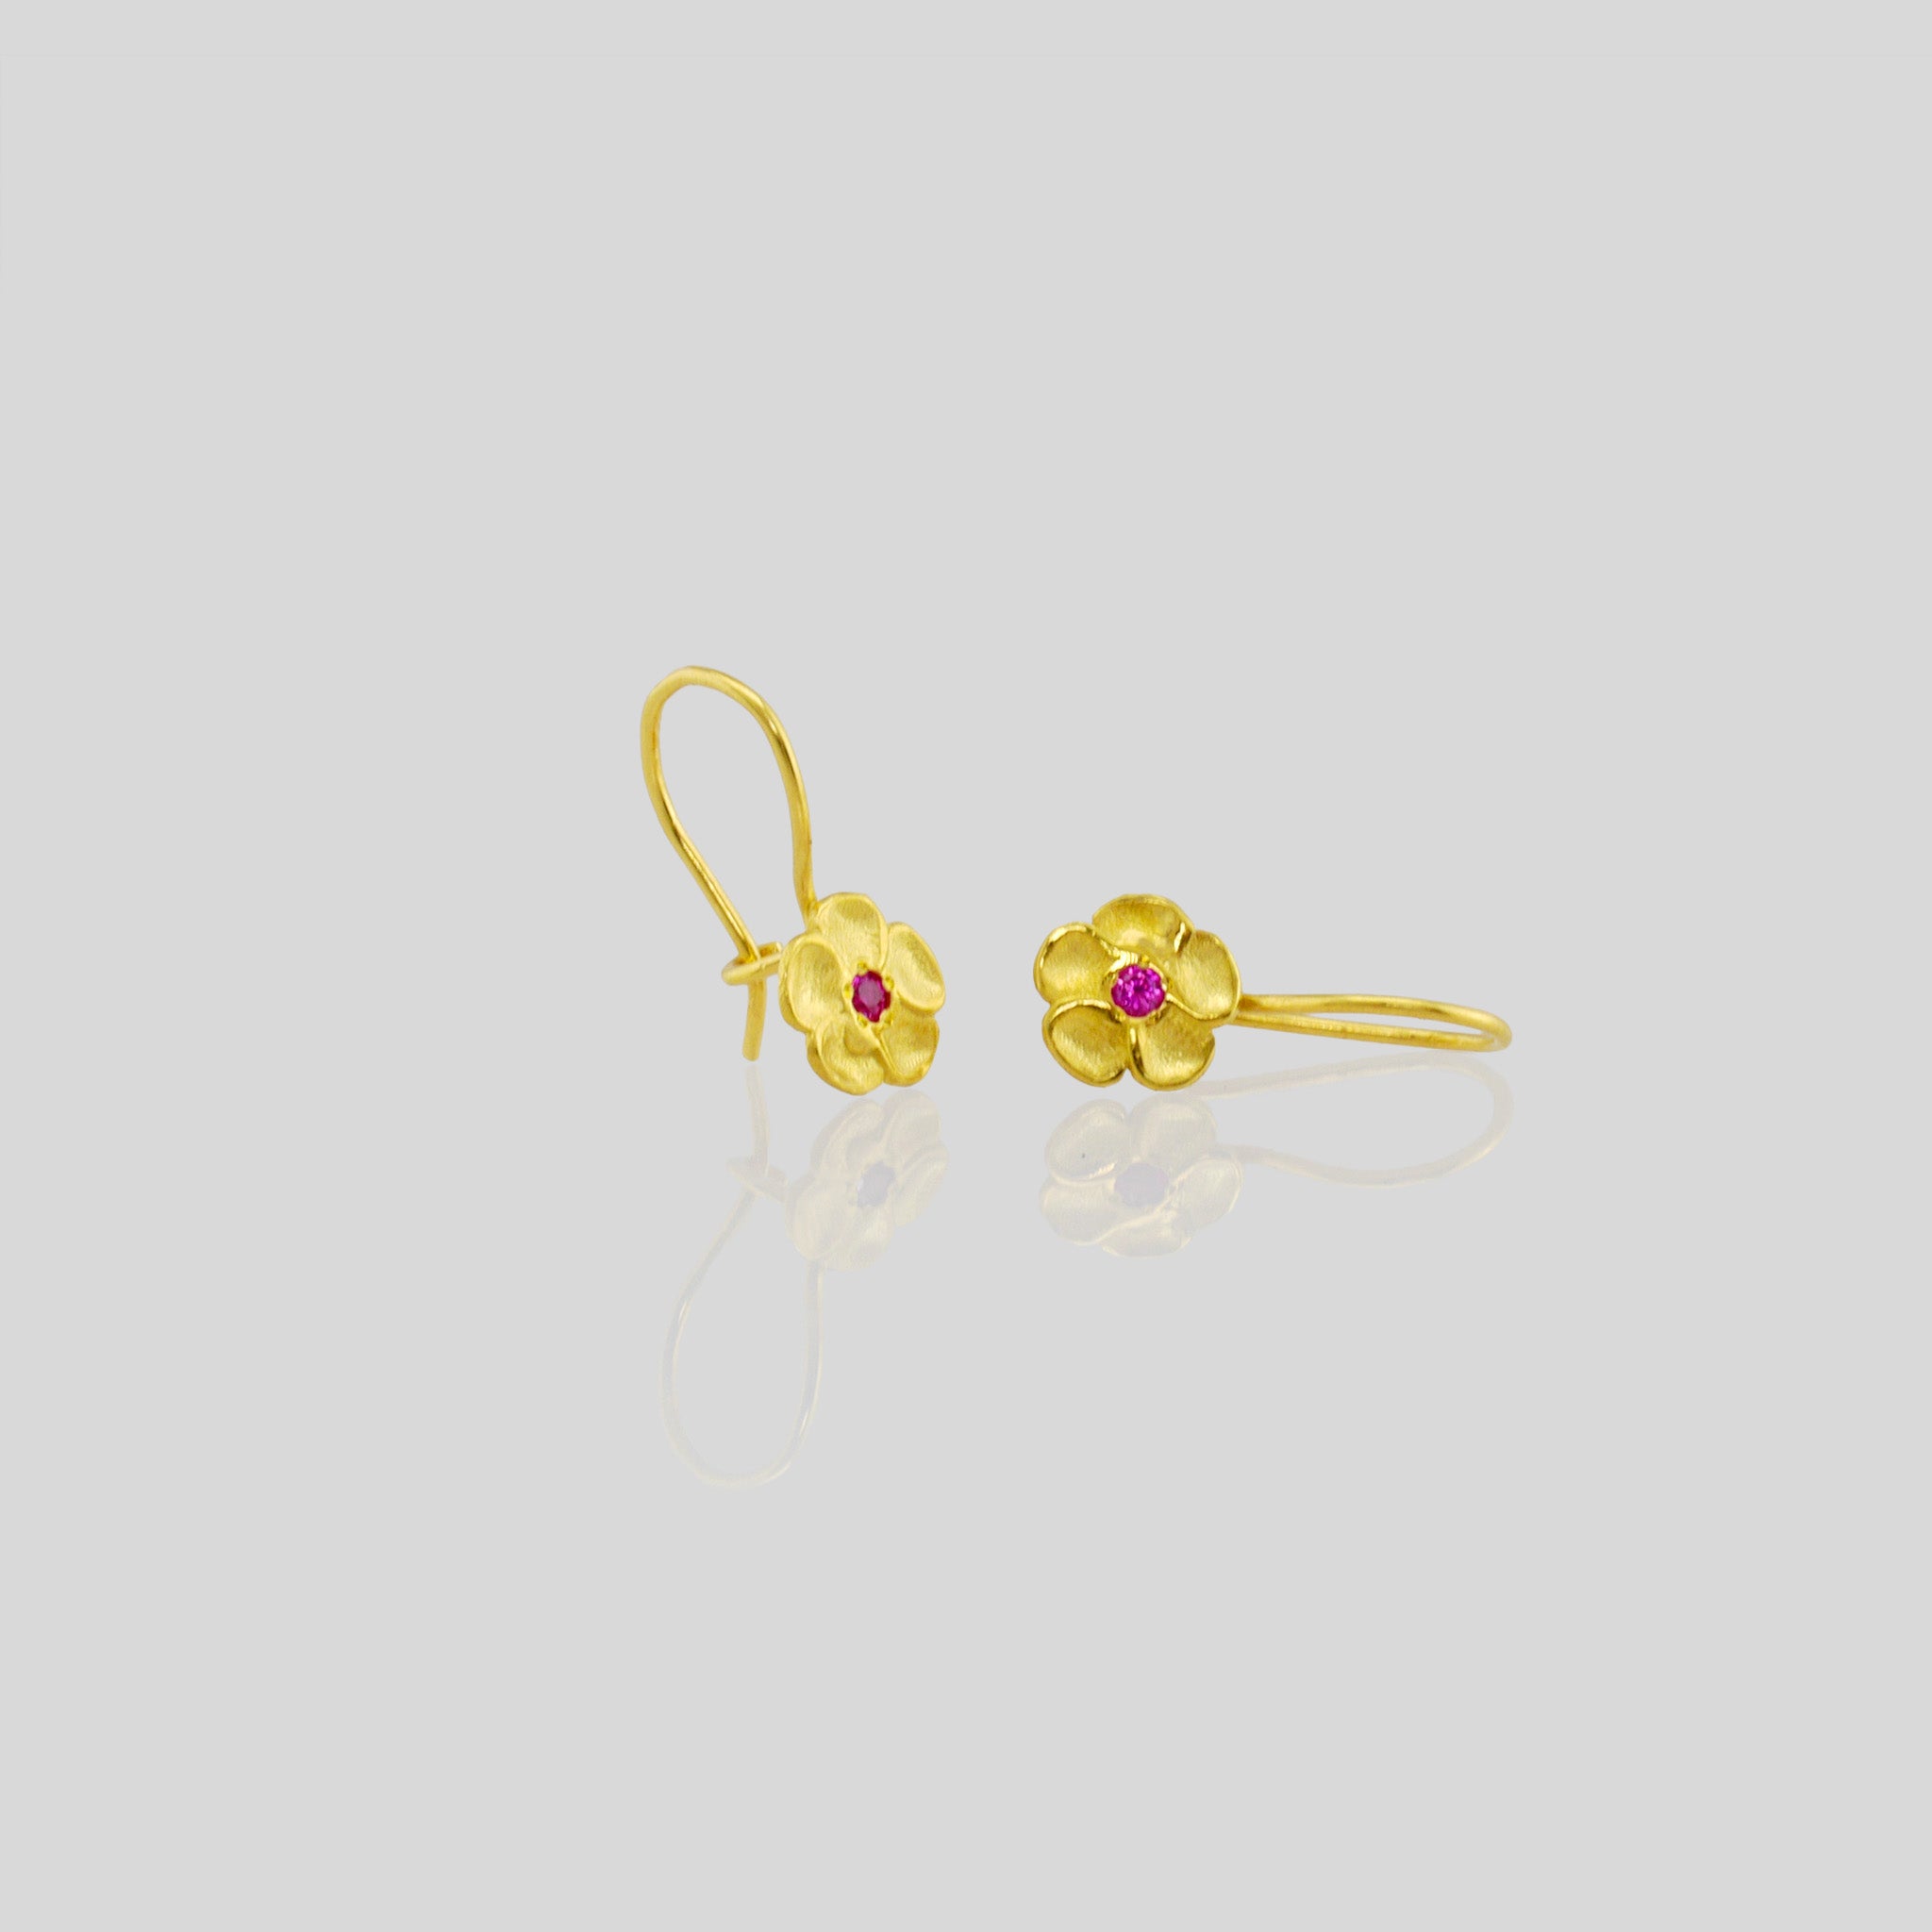 Front and side view of delicate yellow gold flower drop earrings with a sparkling ruby center. Perfect for any occasion!